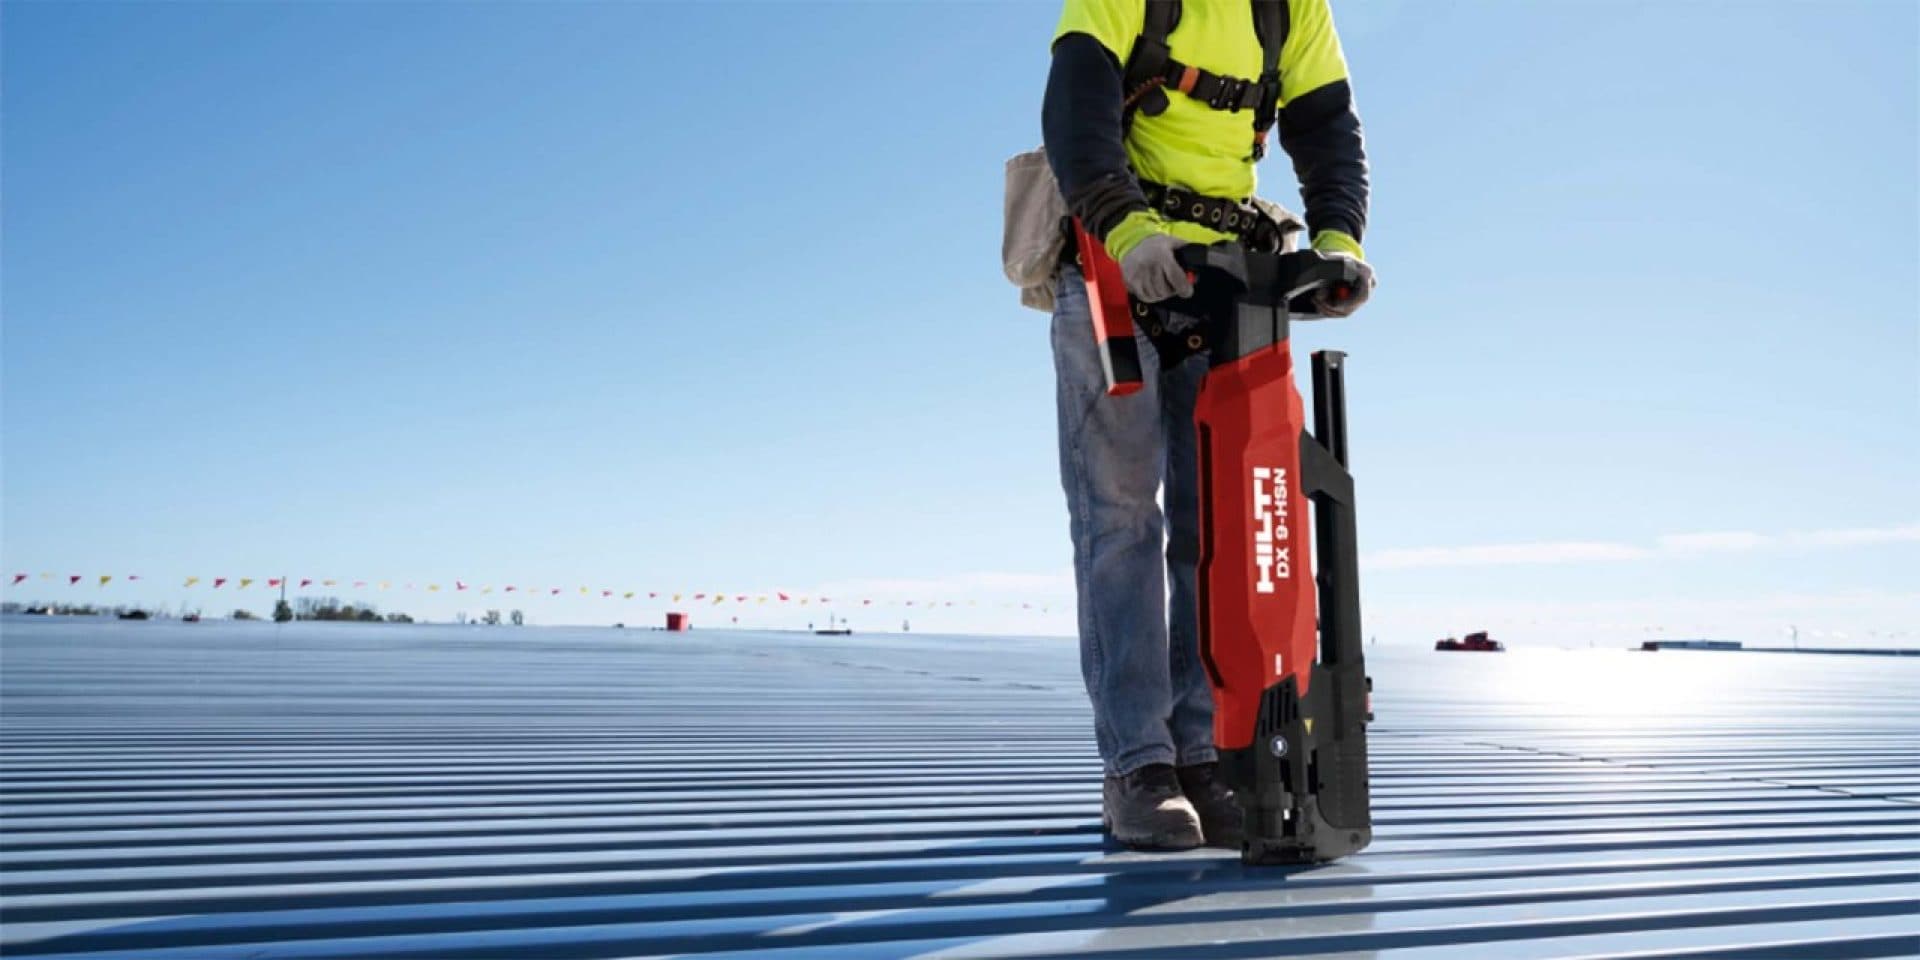 the DX 9 stand-up decking tool can be used with the Hilti Connect app